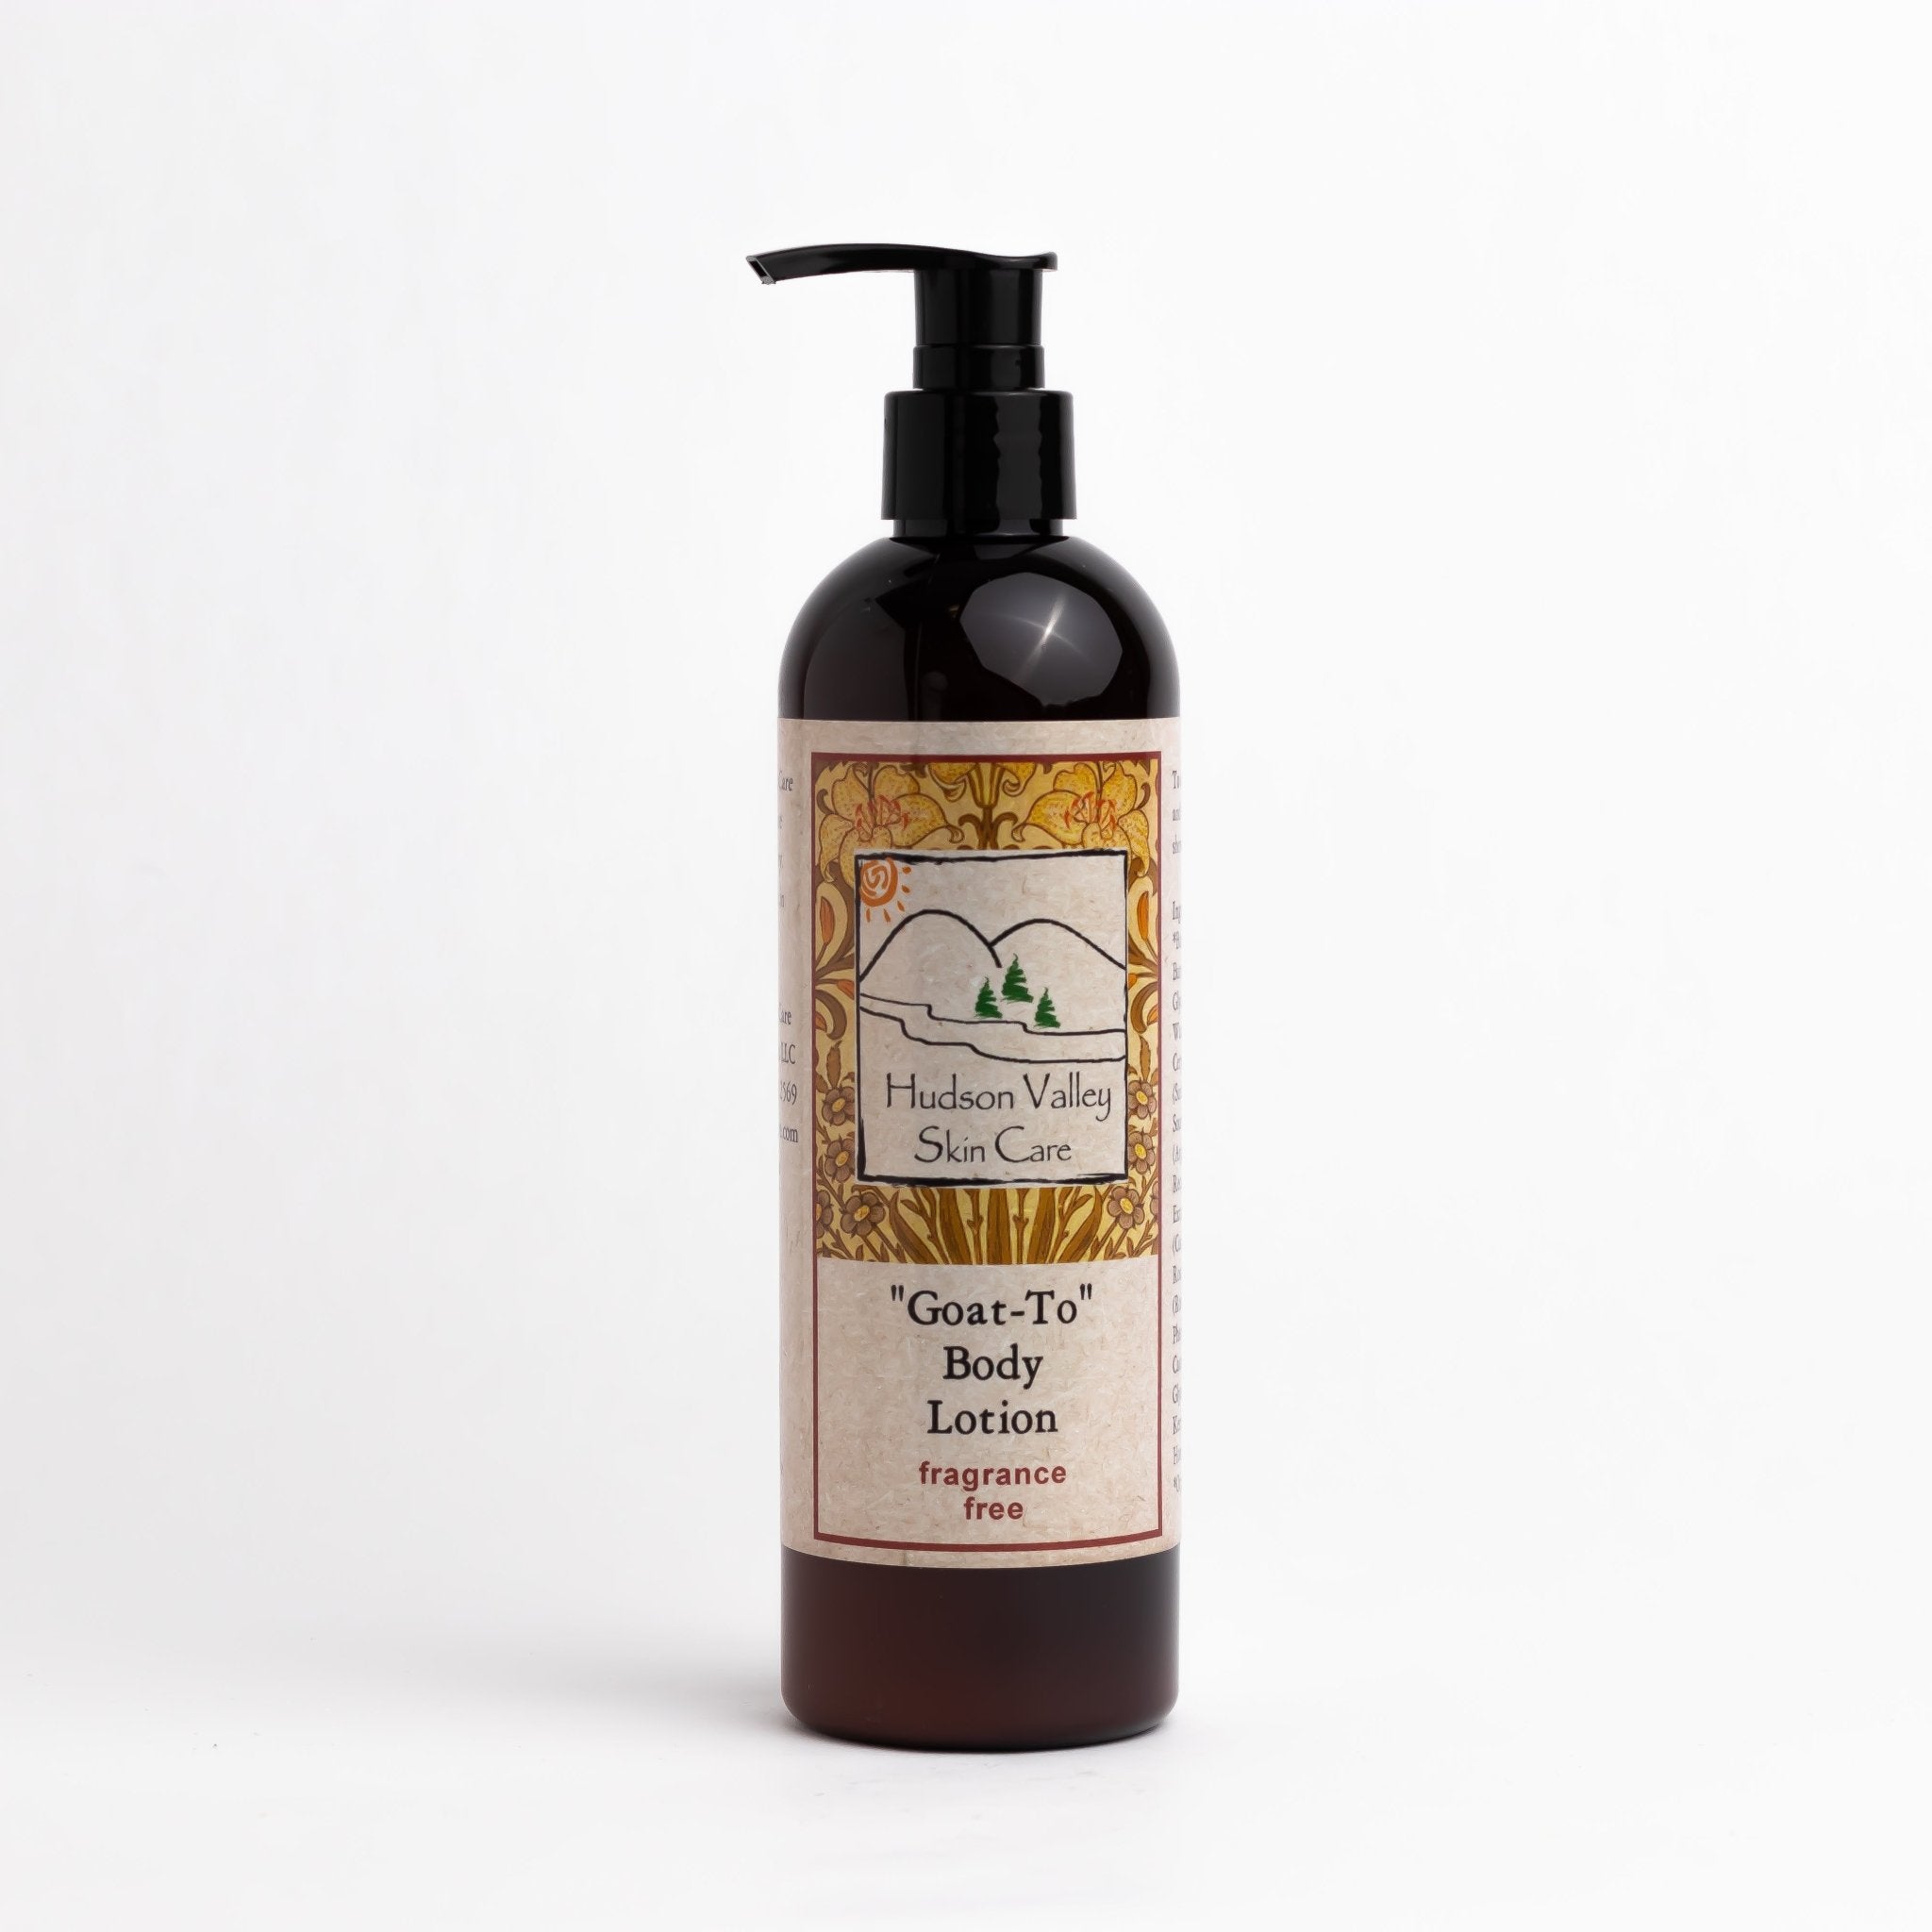 Fragrance Free Goat-to Body Lotion